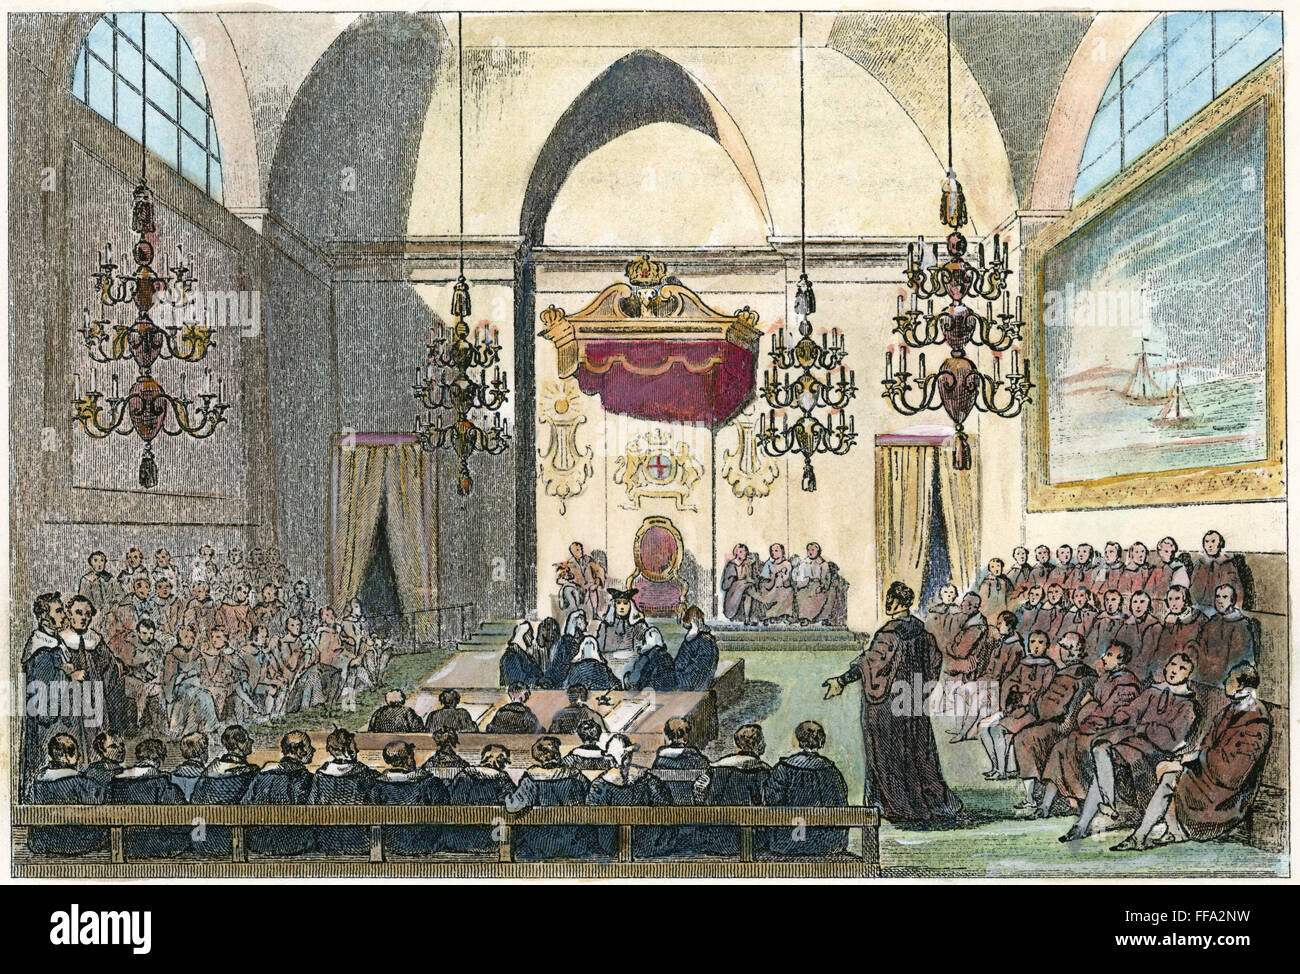 BRITISH HOUSE OF LORDS. /NFrench dopo incisione A.C. Pugin e Thomas Rowlandson, 1809. Foto Stock